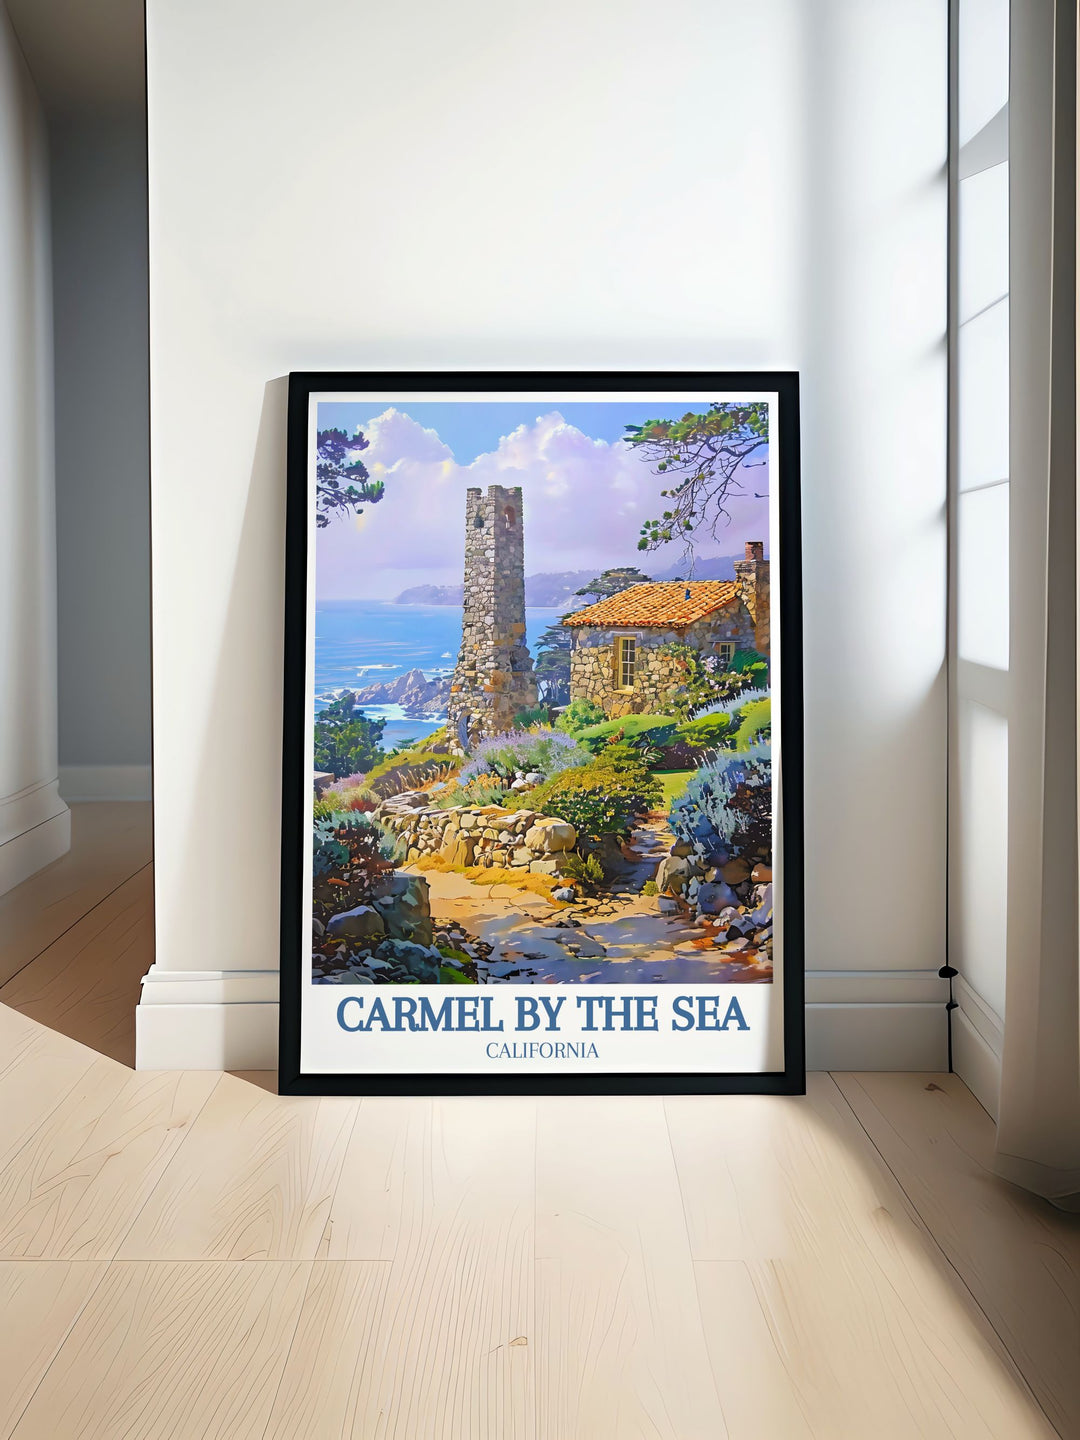 This travel poster captures the iconic charm of Carmel by the Sea, featuring its quaint cottages and artistic atmosphere. Ideal for adding a touch of the towns unique beauty to your home decor and celebrating one of Californias most beloved villages.